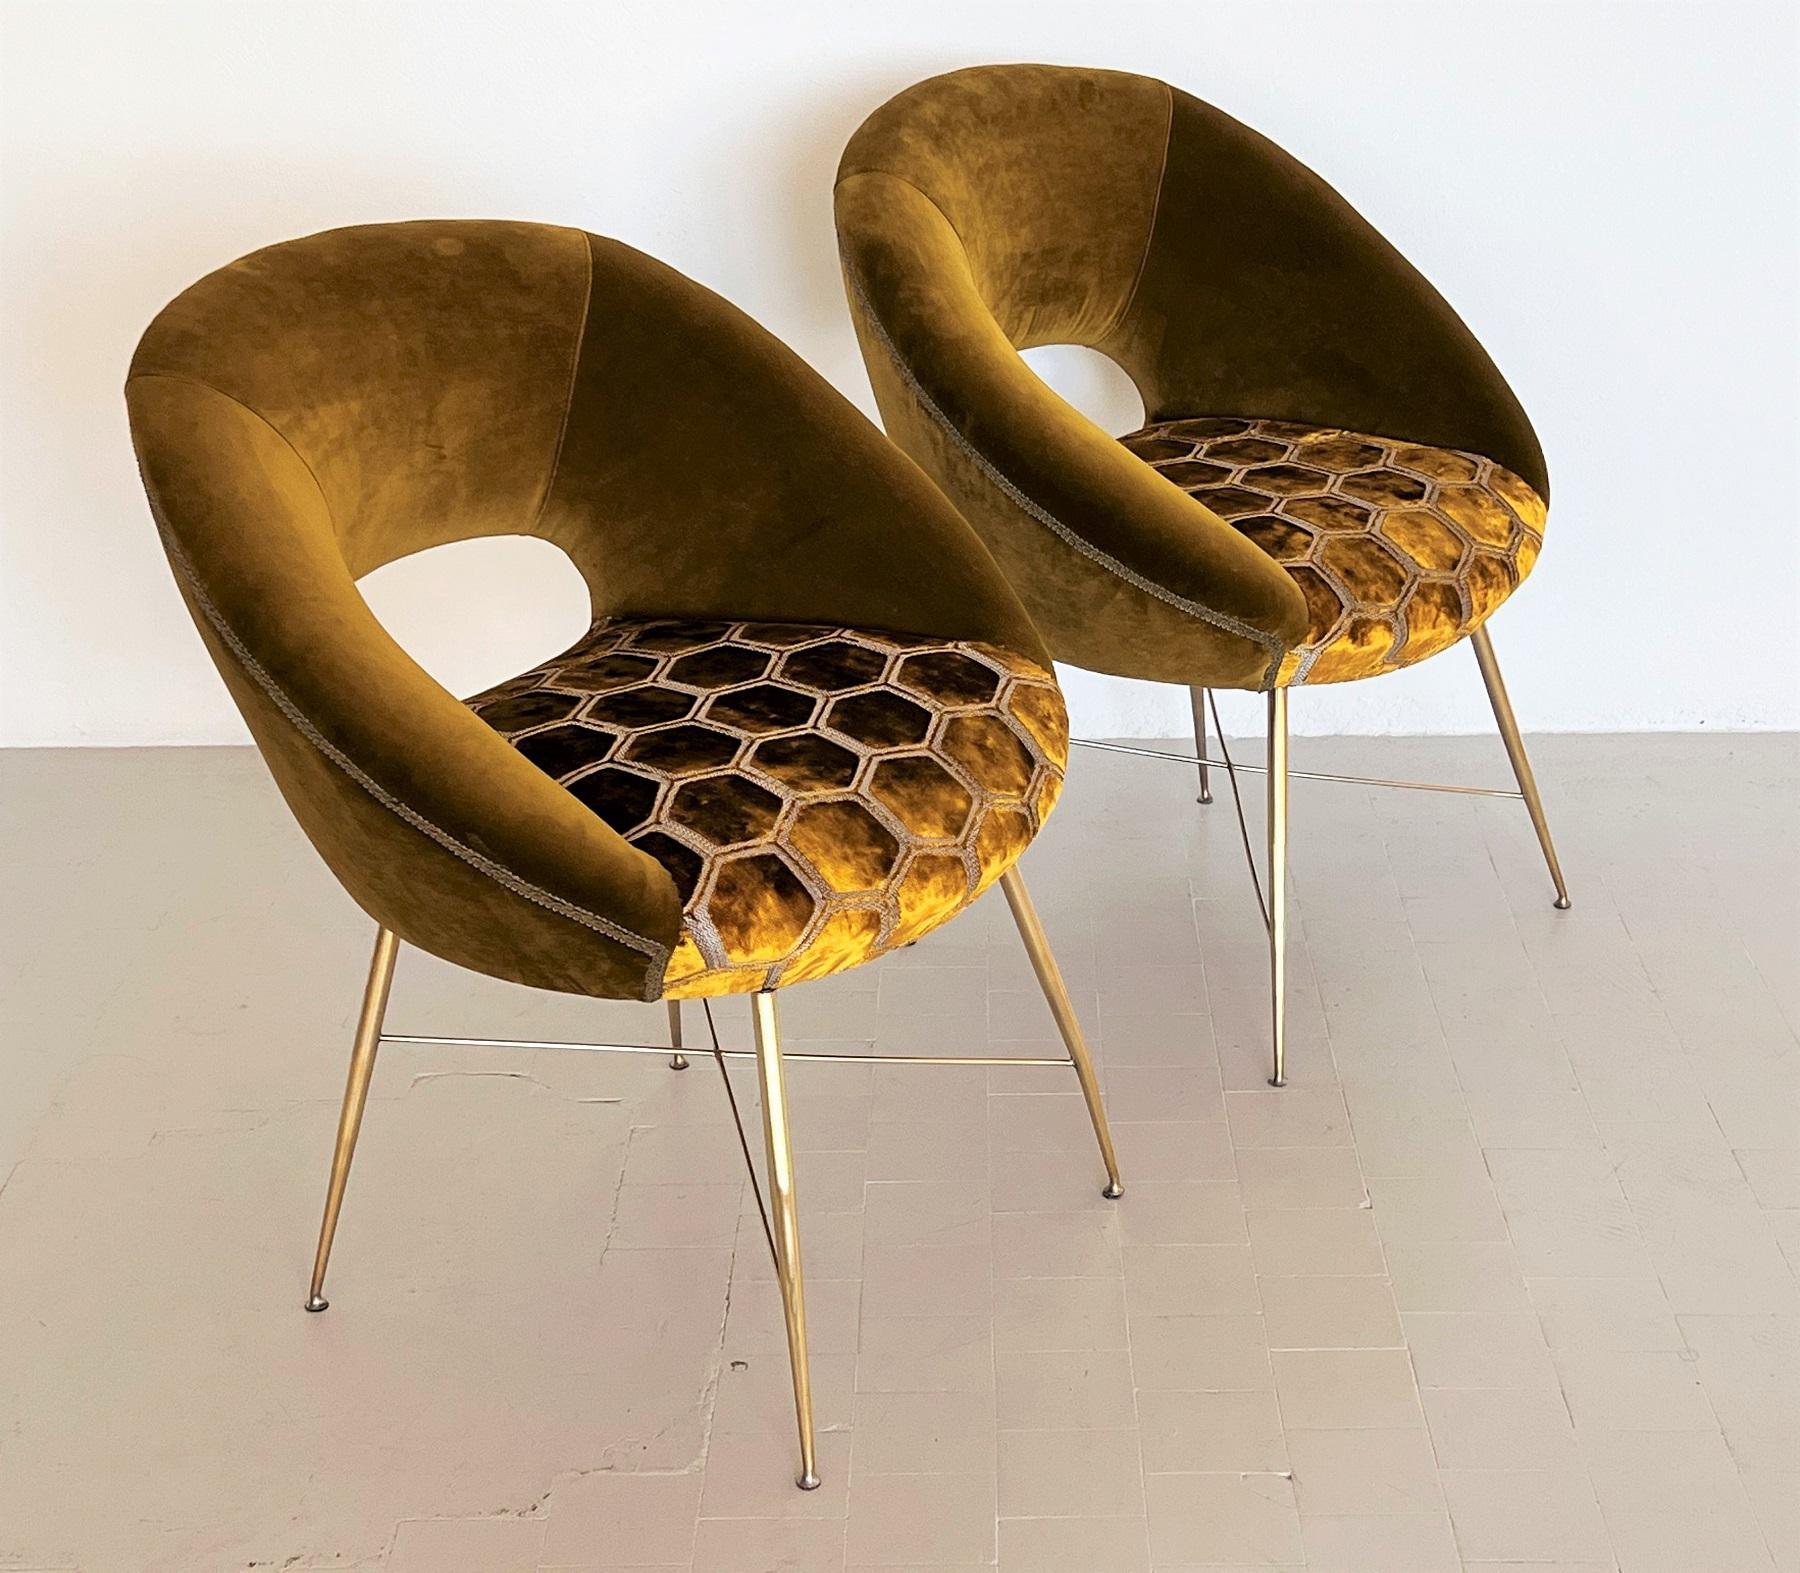 Hand-Crafted Silvio Cavatorta Pair of Chairs with Brass Legs Re-upholstered in Velvet, 1950s For Sale